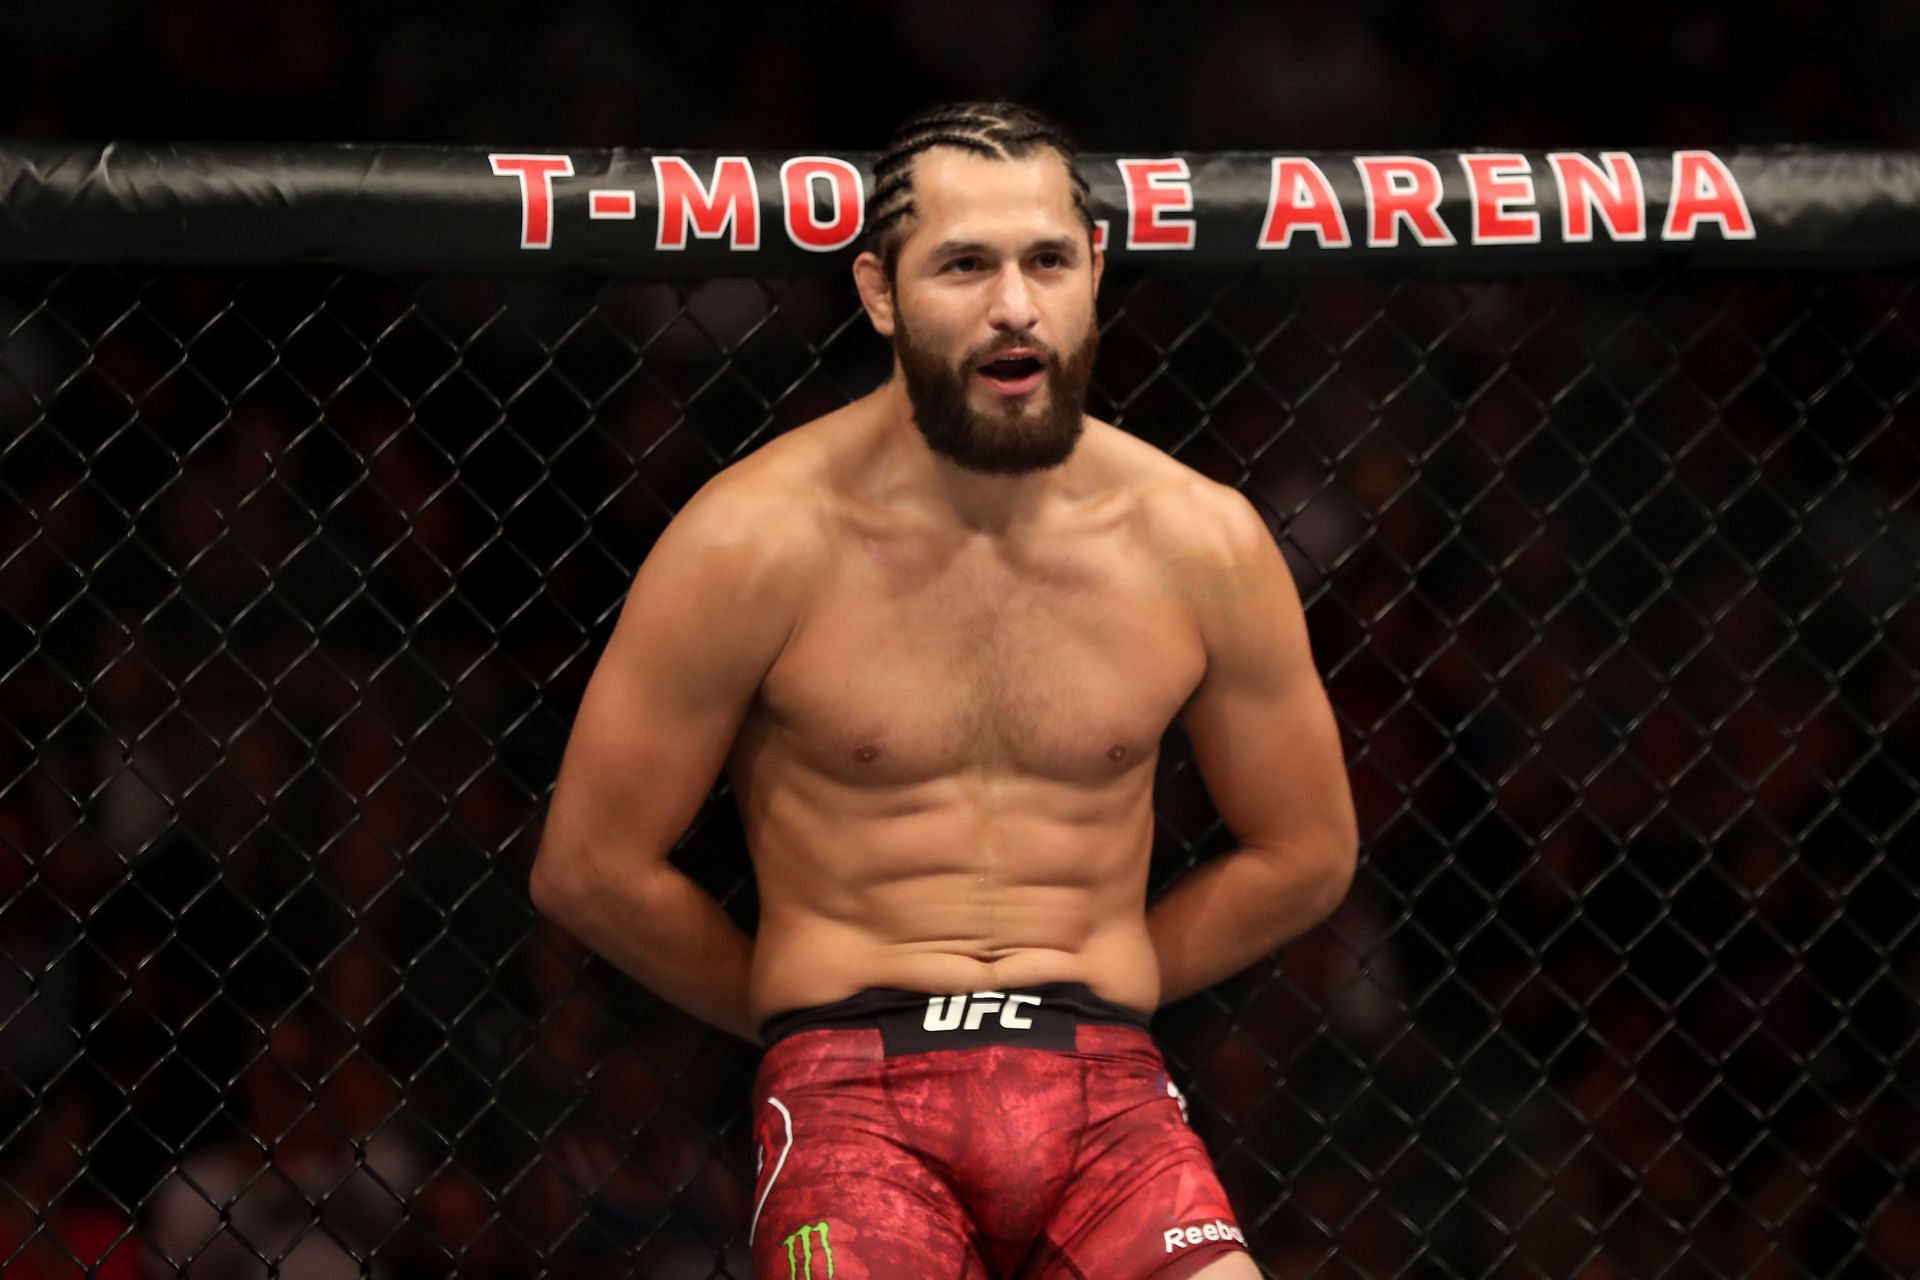 Masvidal holds a record of 35-15